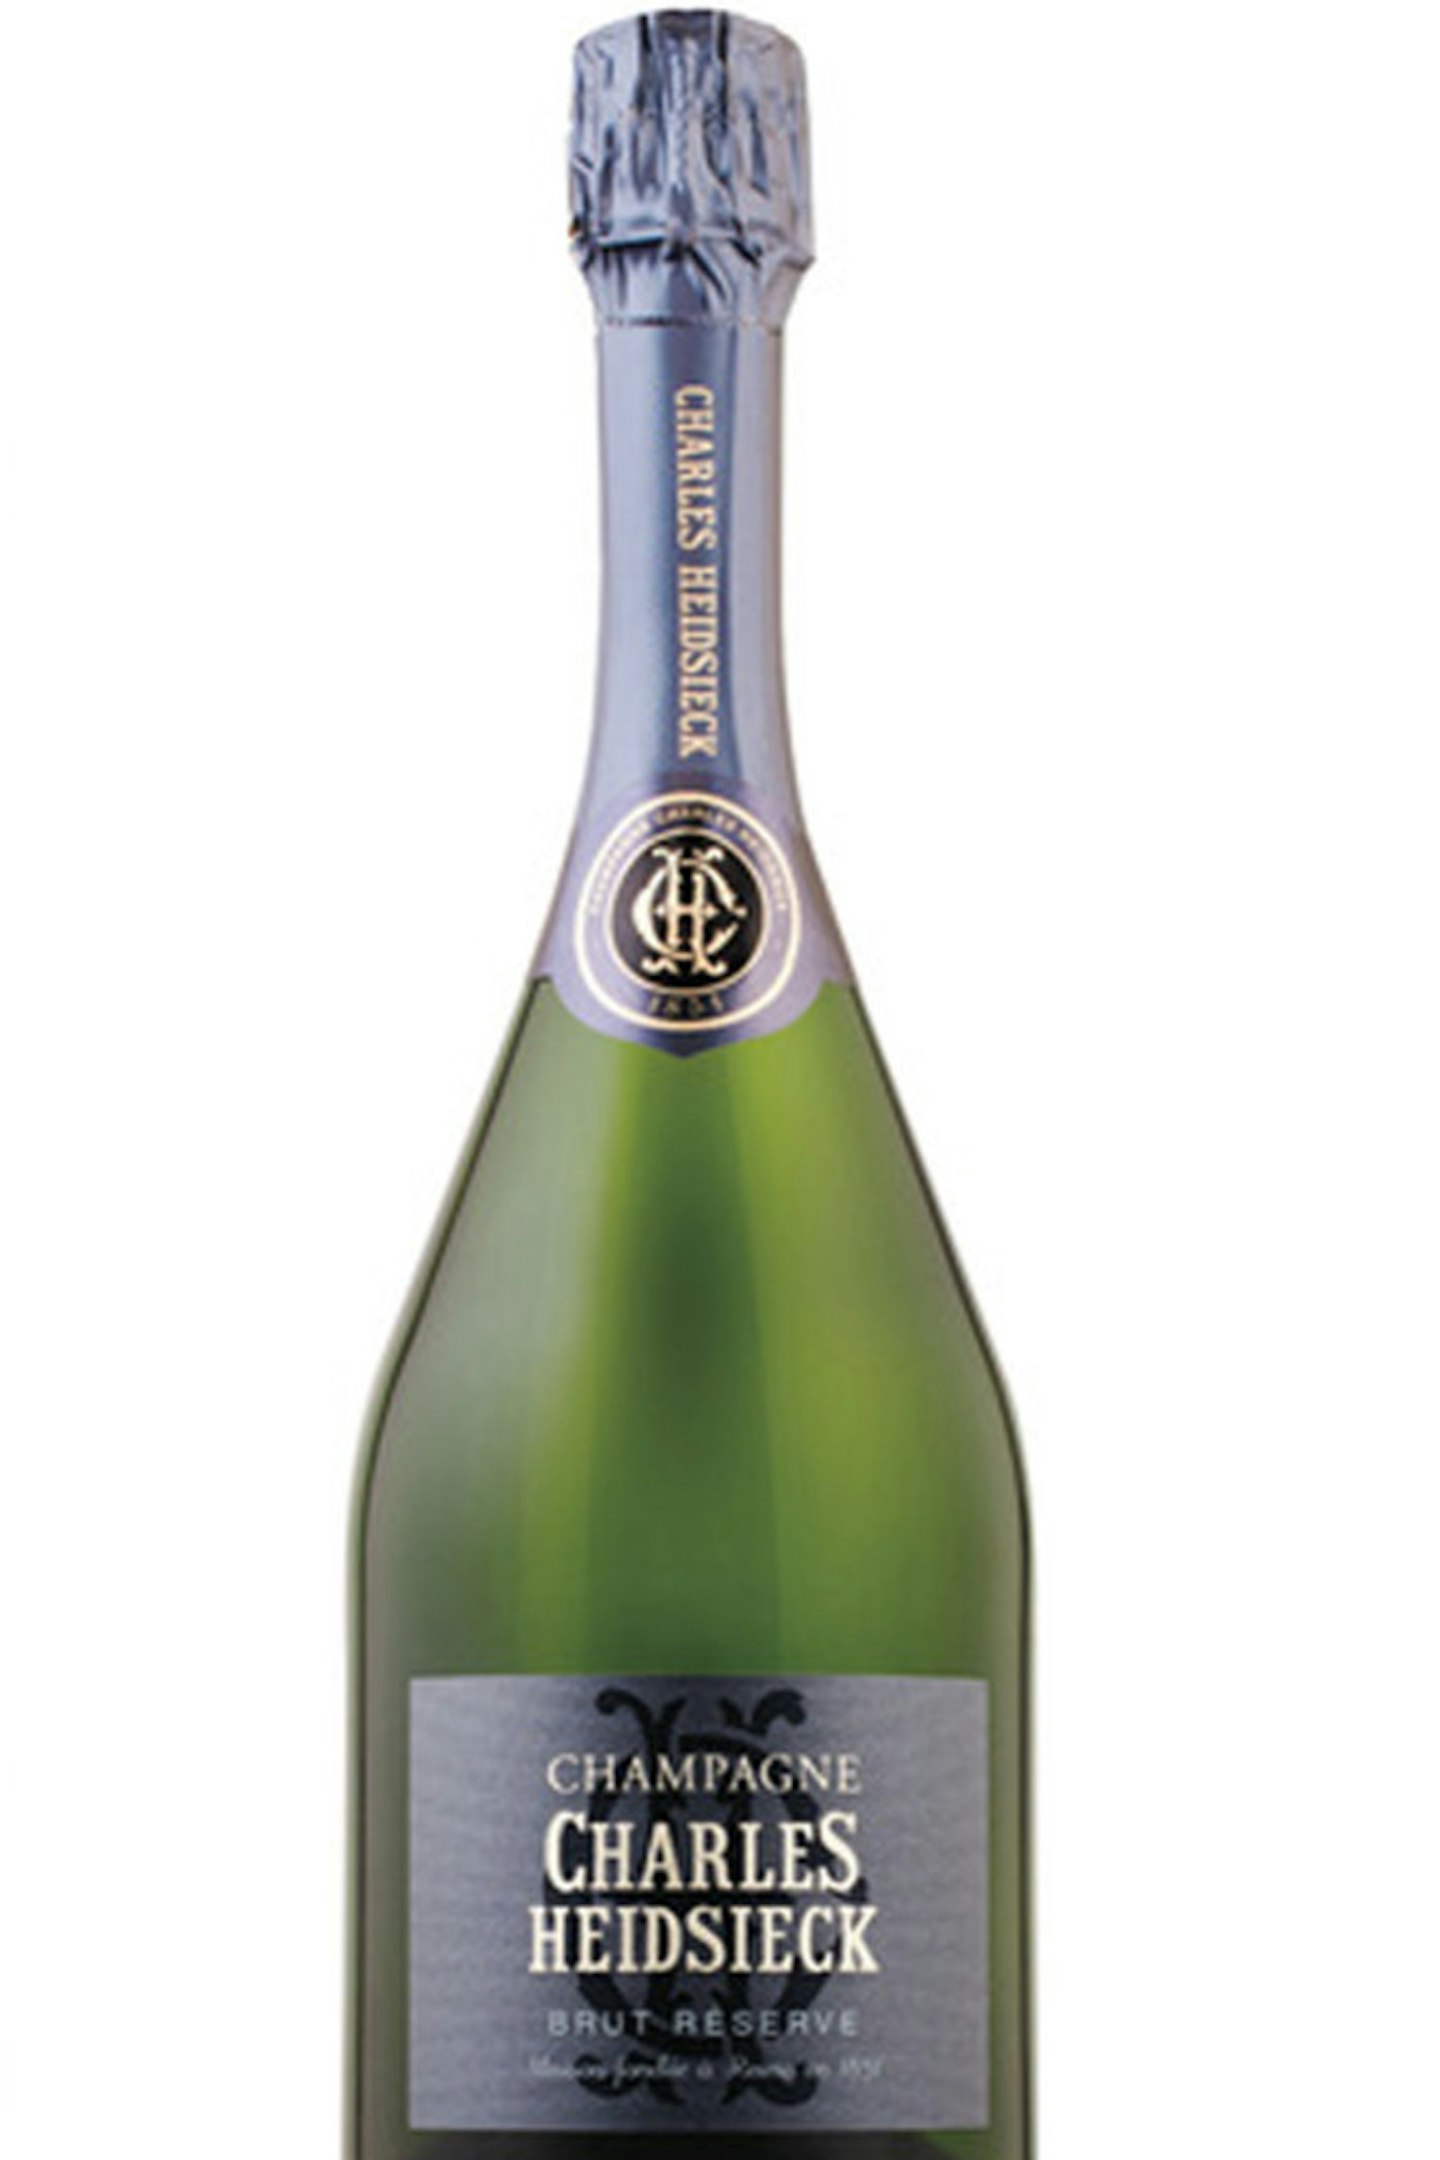 6. THE BEST CHAMPAGNE